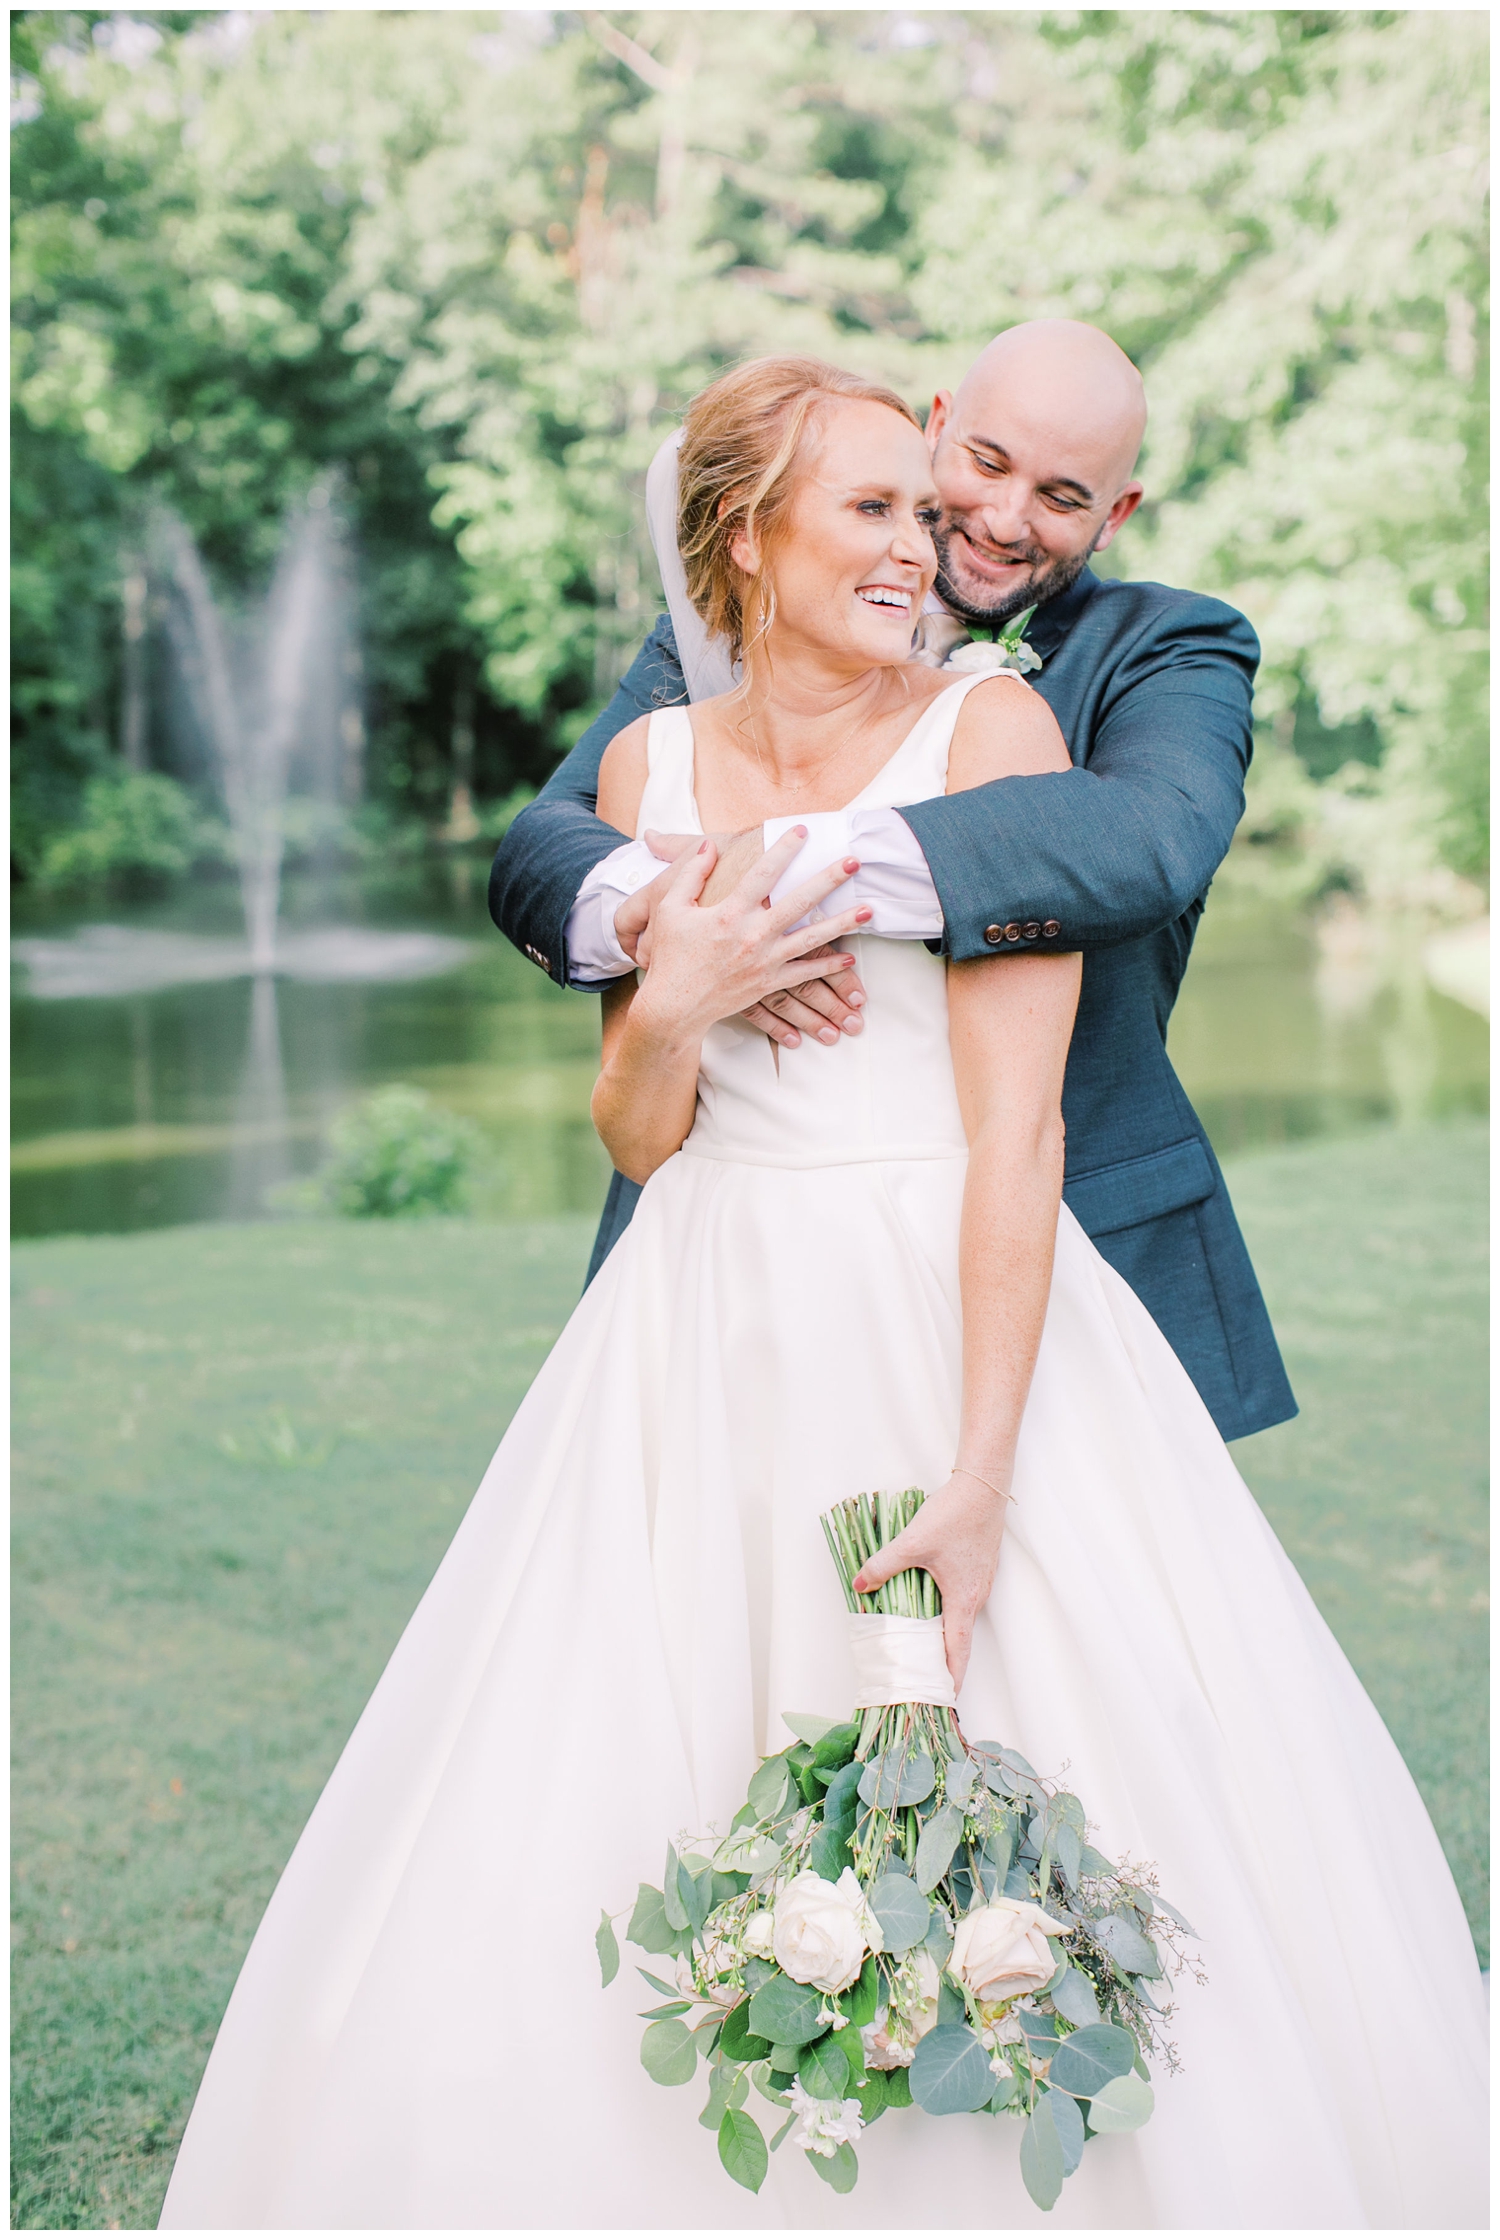 laughing-bride-and-groom-portrait-by-a-fountain